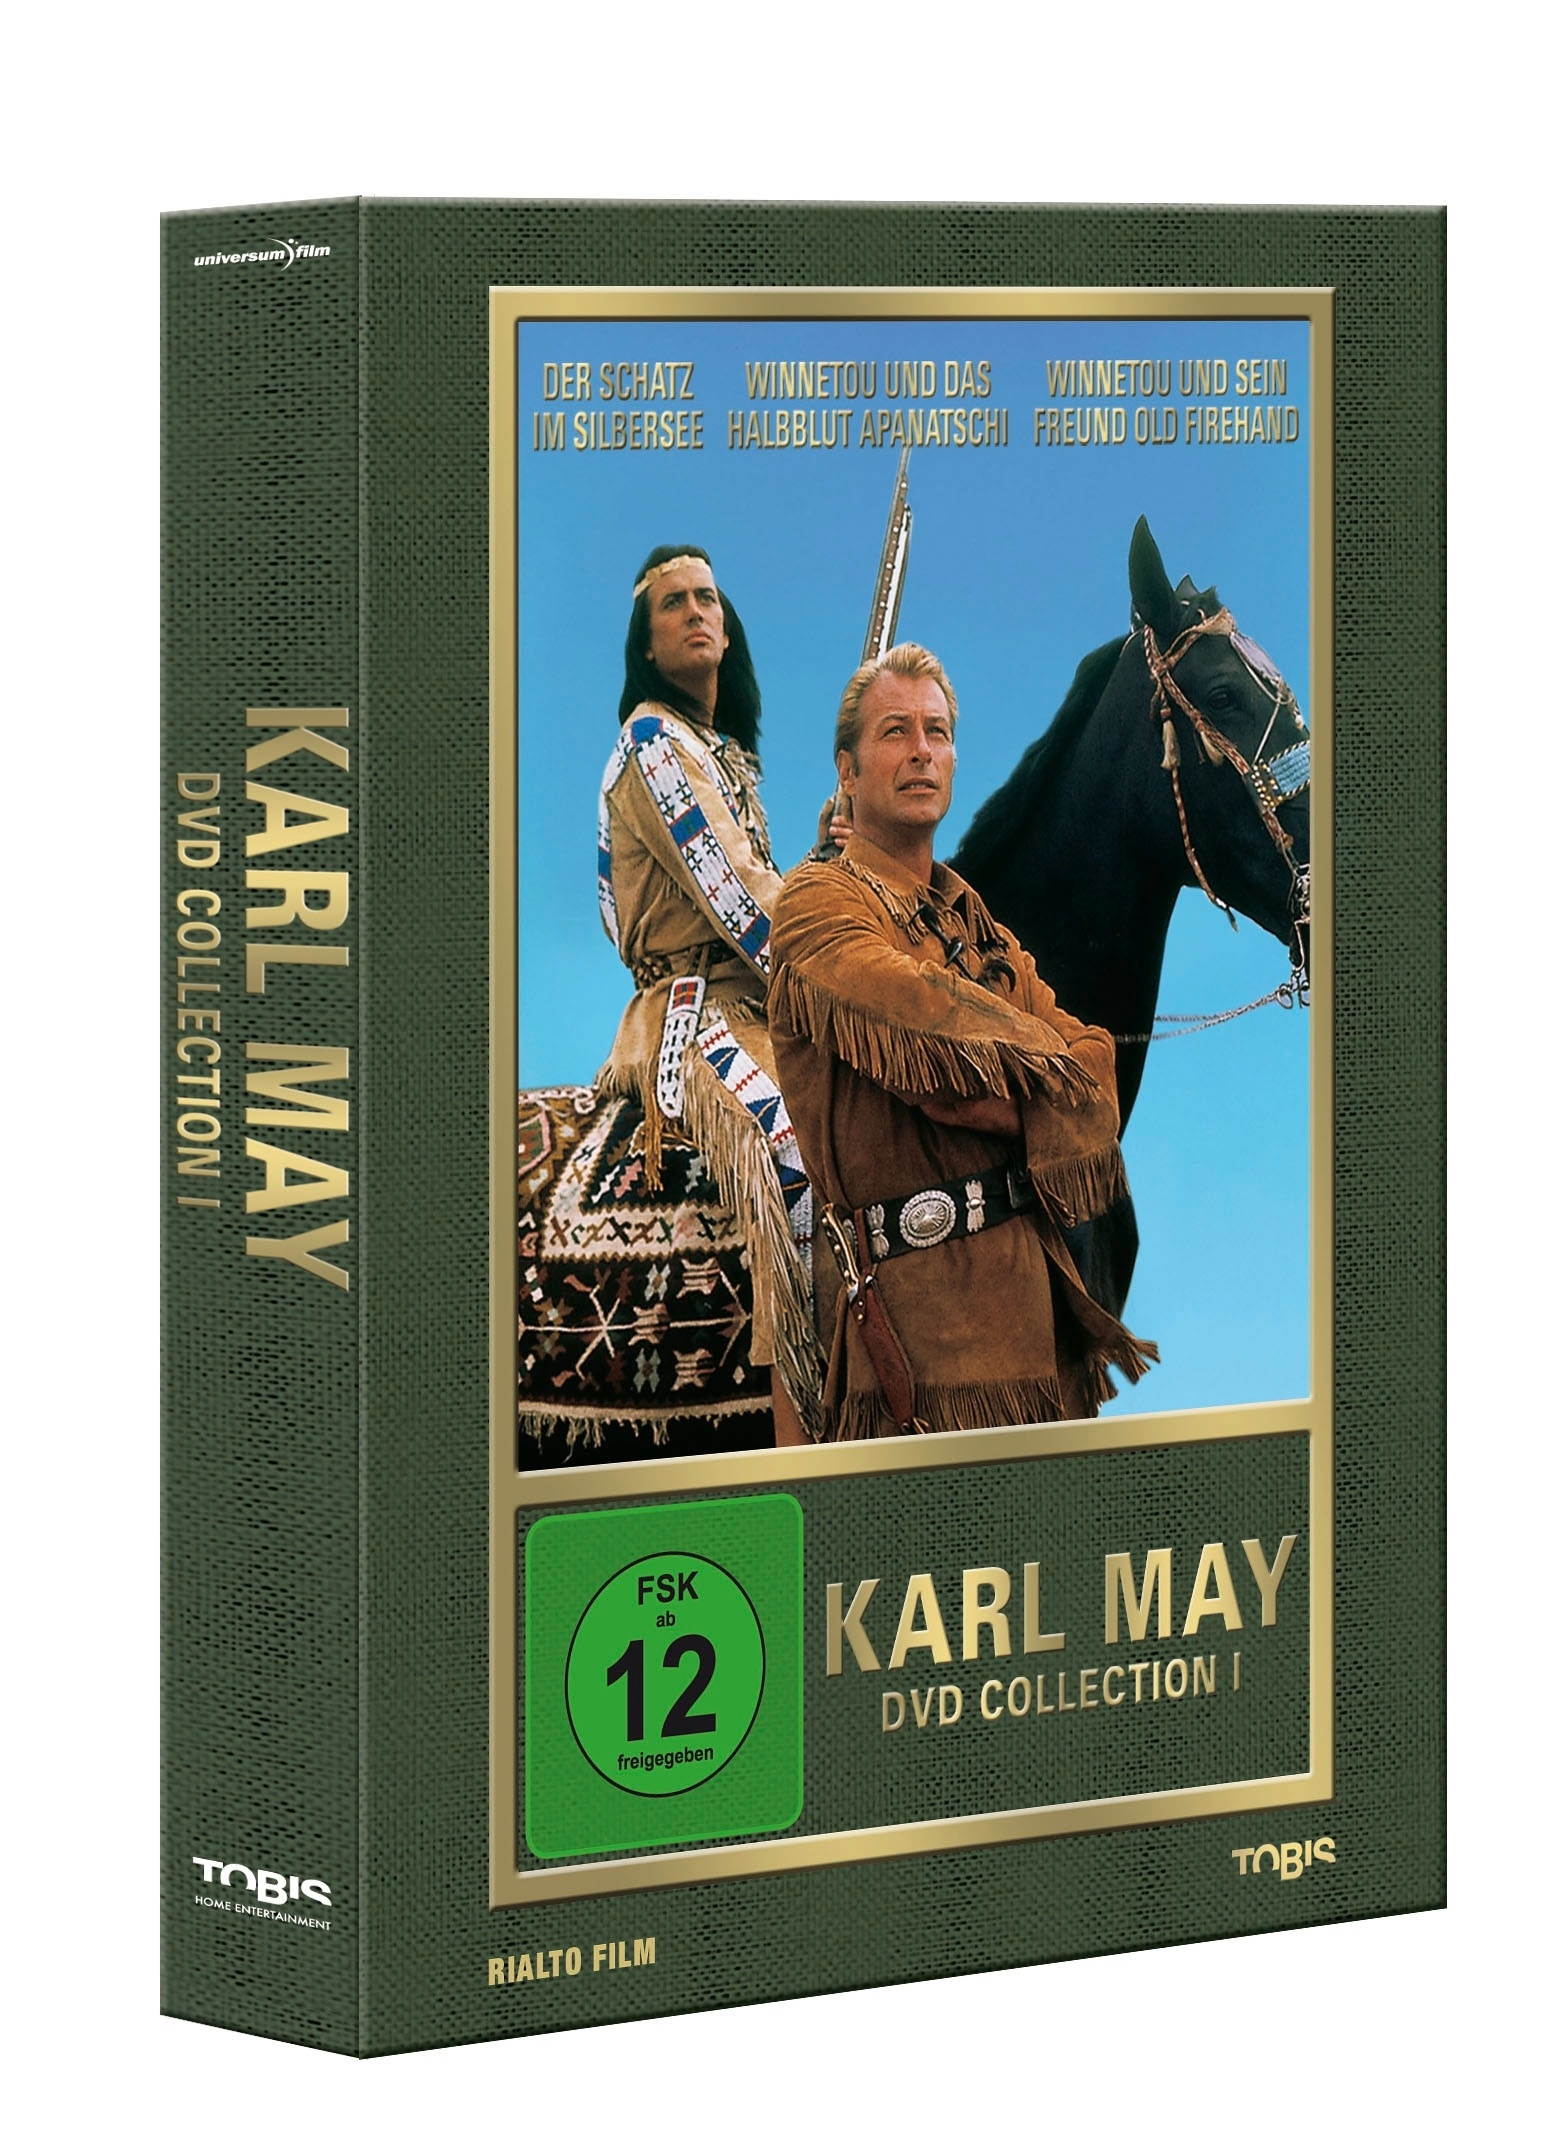 Image of Karl May DVD Collection 1